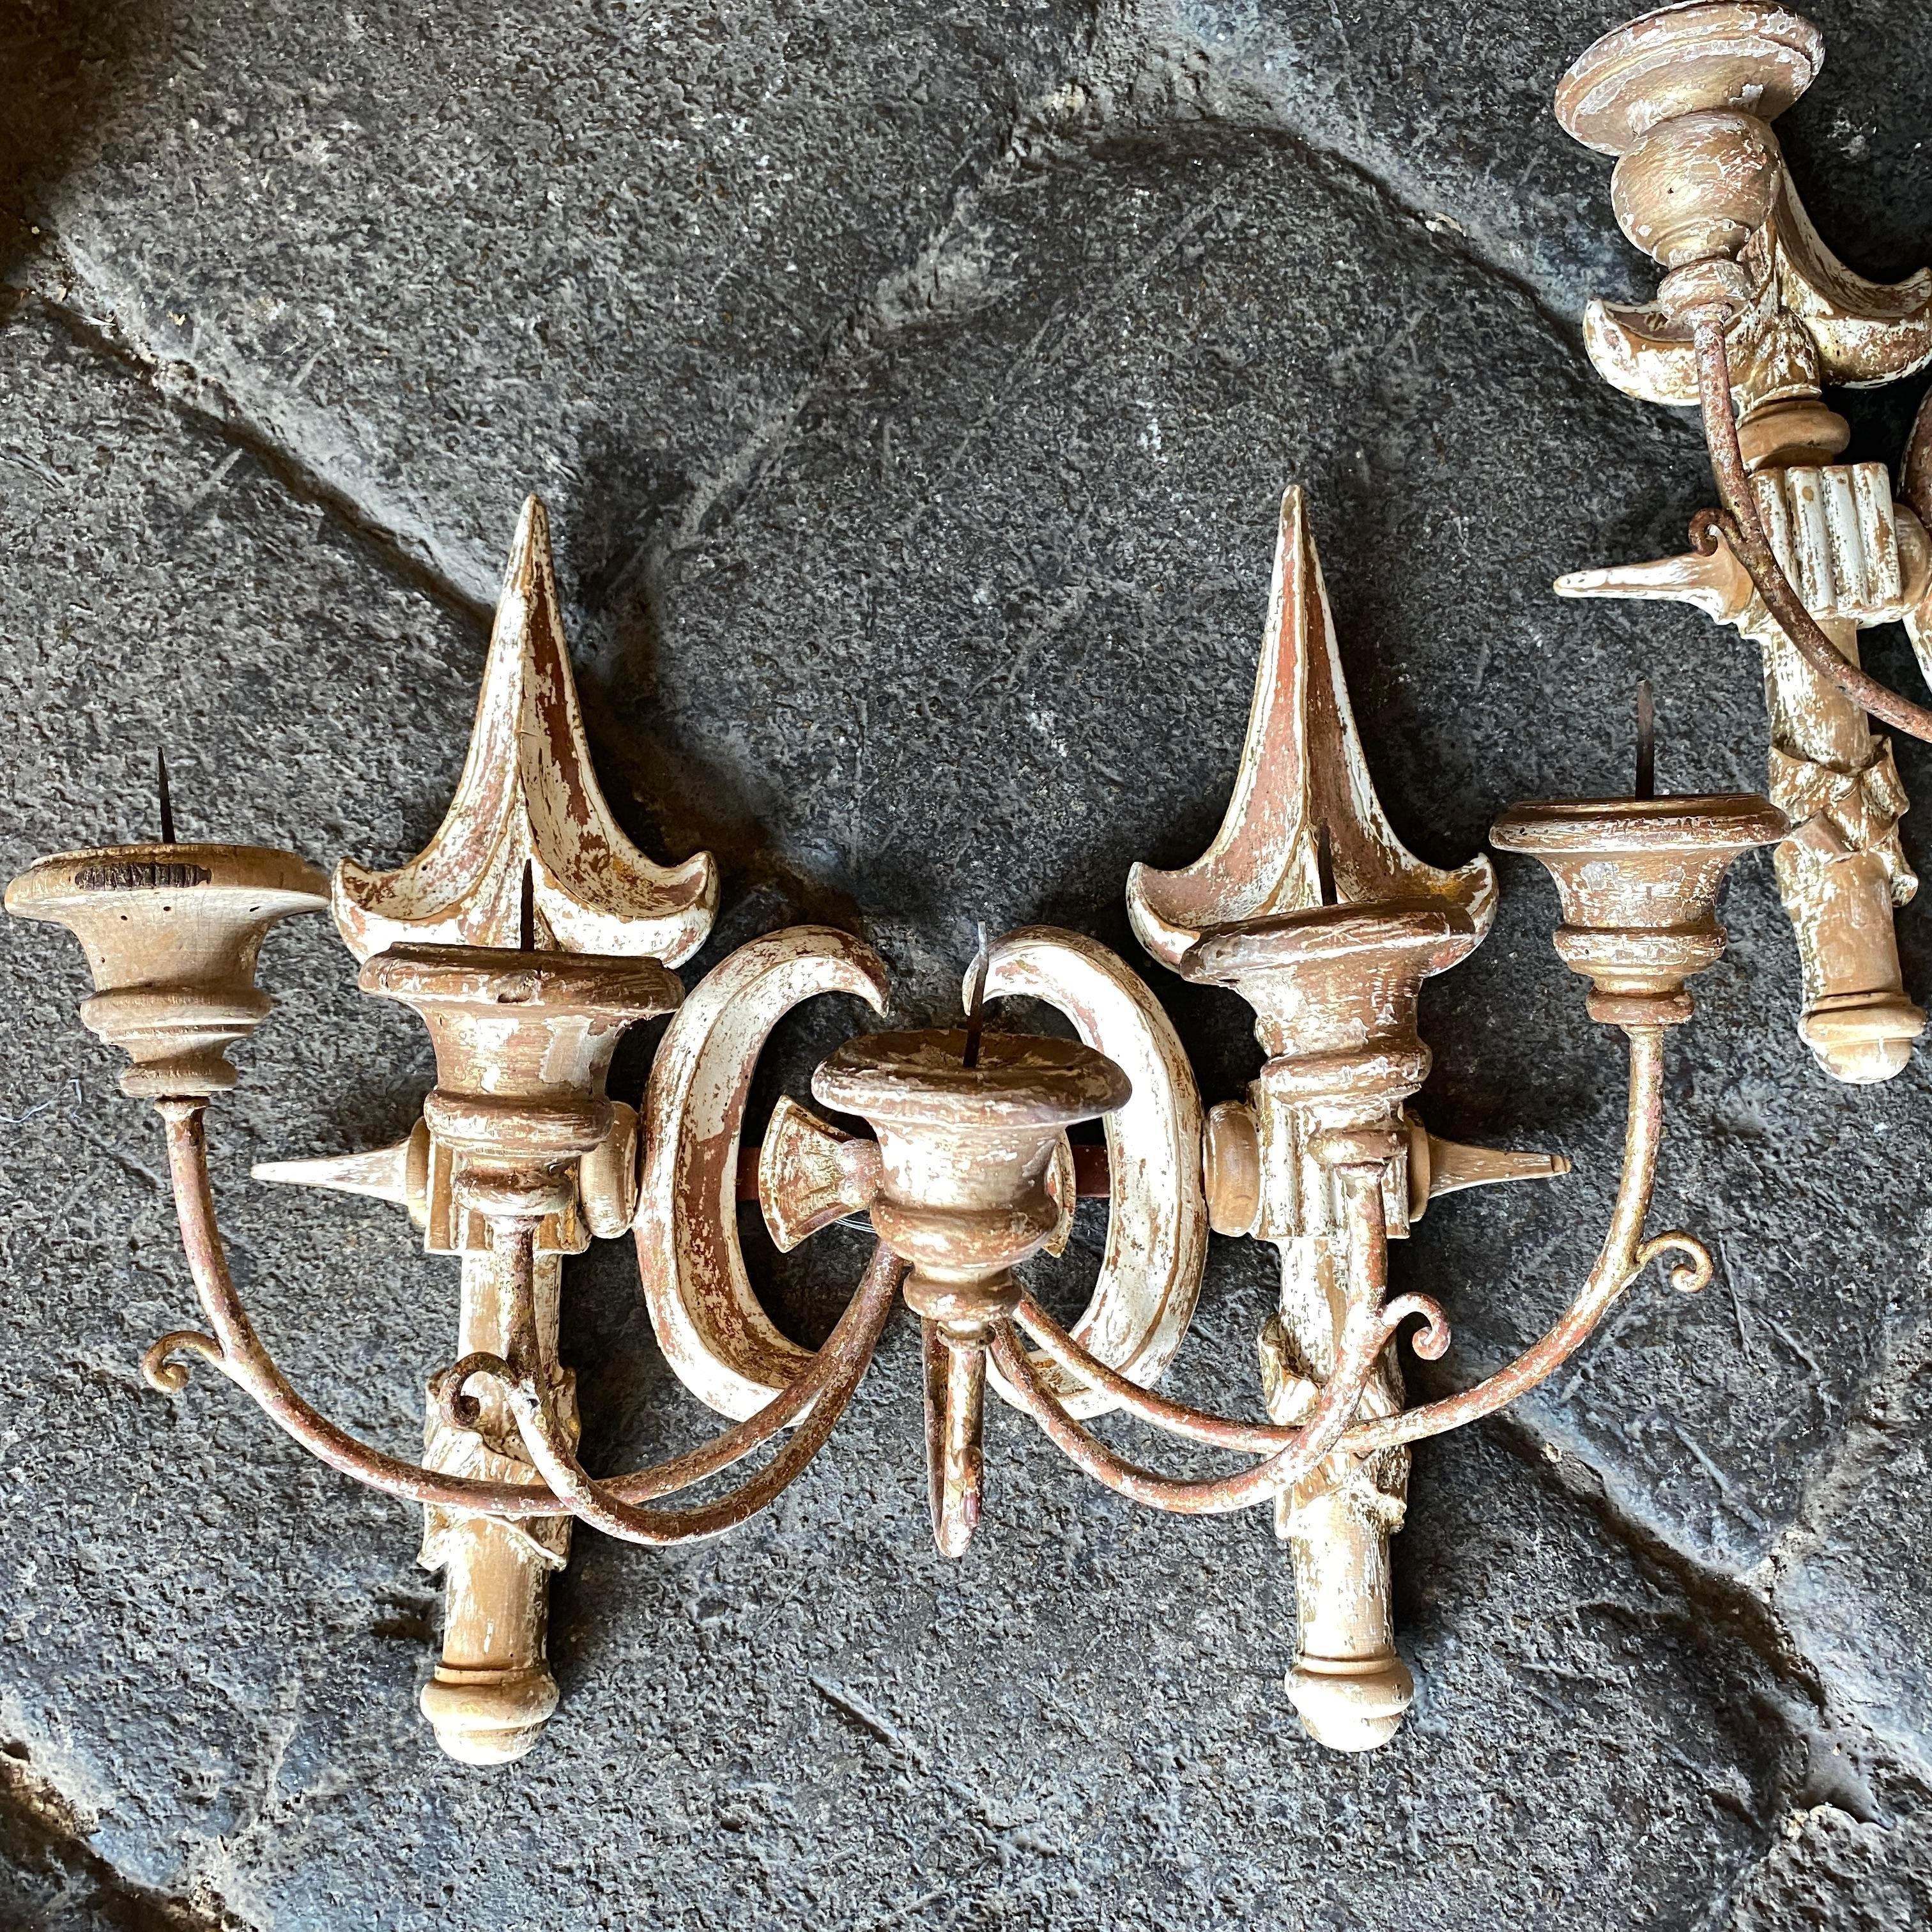 A pair of gilded and lacquered wood wall candelabra hand-crafted in Tuscany in late 19th century. They are in original conditions, the back part has been recently reinforced.